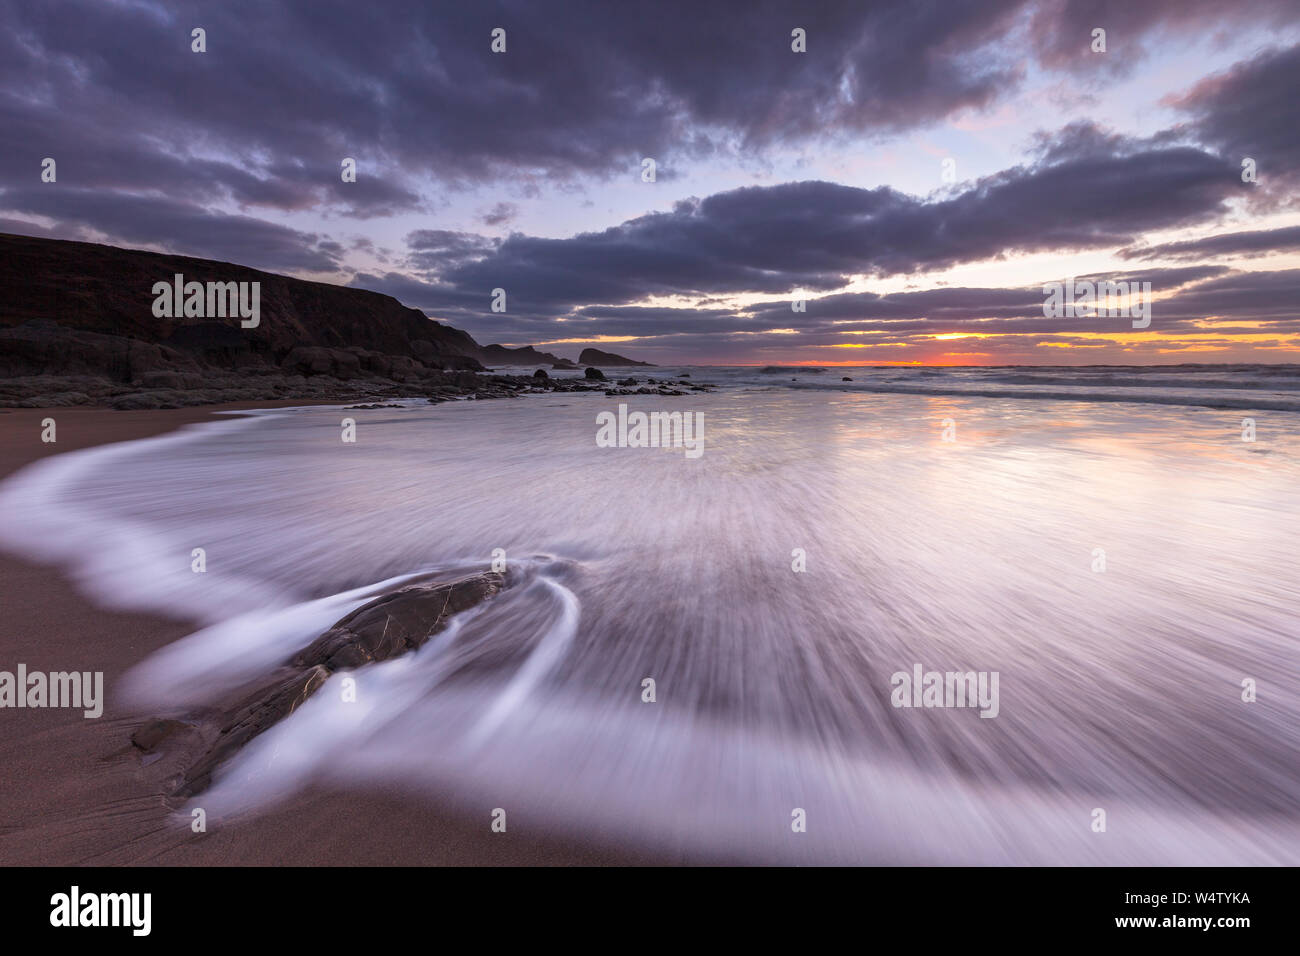 Waves flow over the sand and rocks at Sunset at Welcombe Mouth Beach in North Devon, UK. Stock Photo